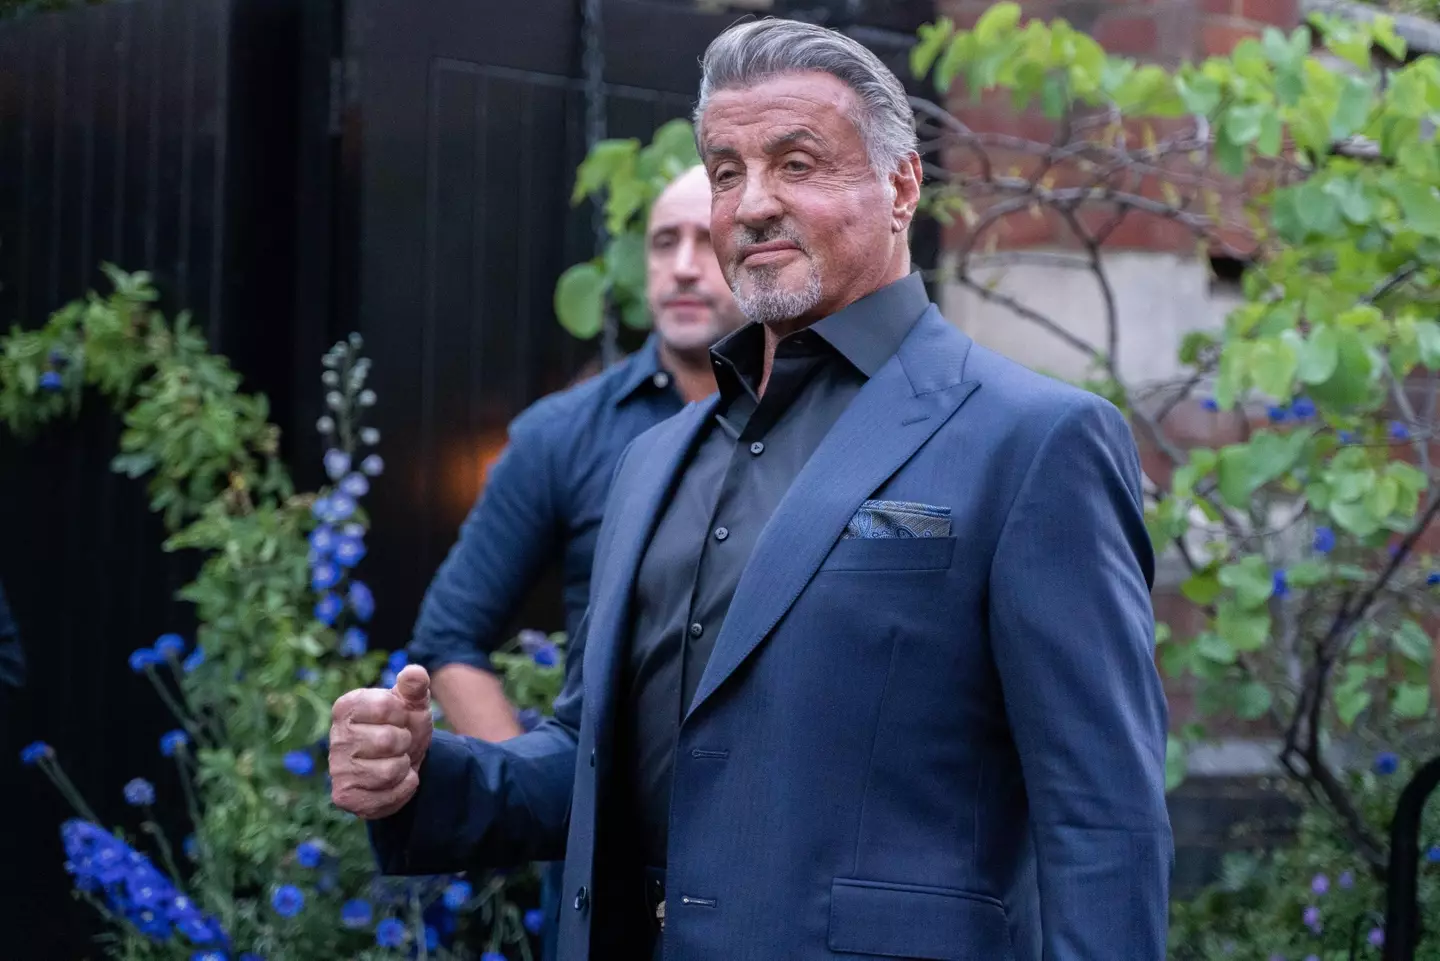 Stallone took to social media to discuss Willis' departure for Harrison Ford.